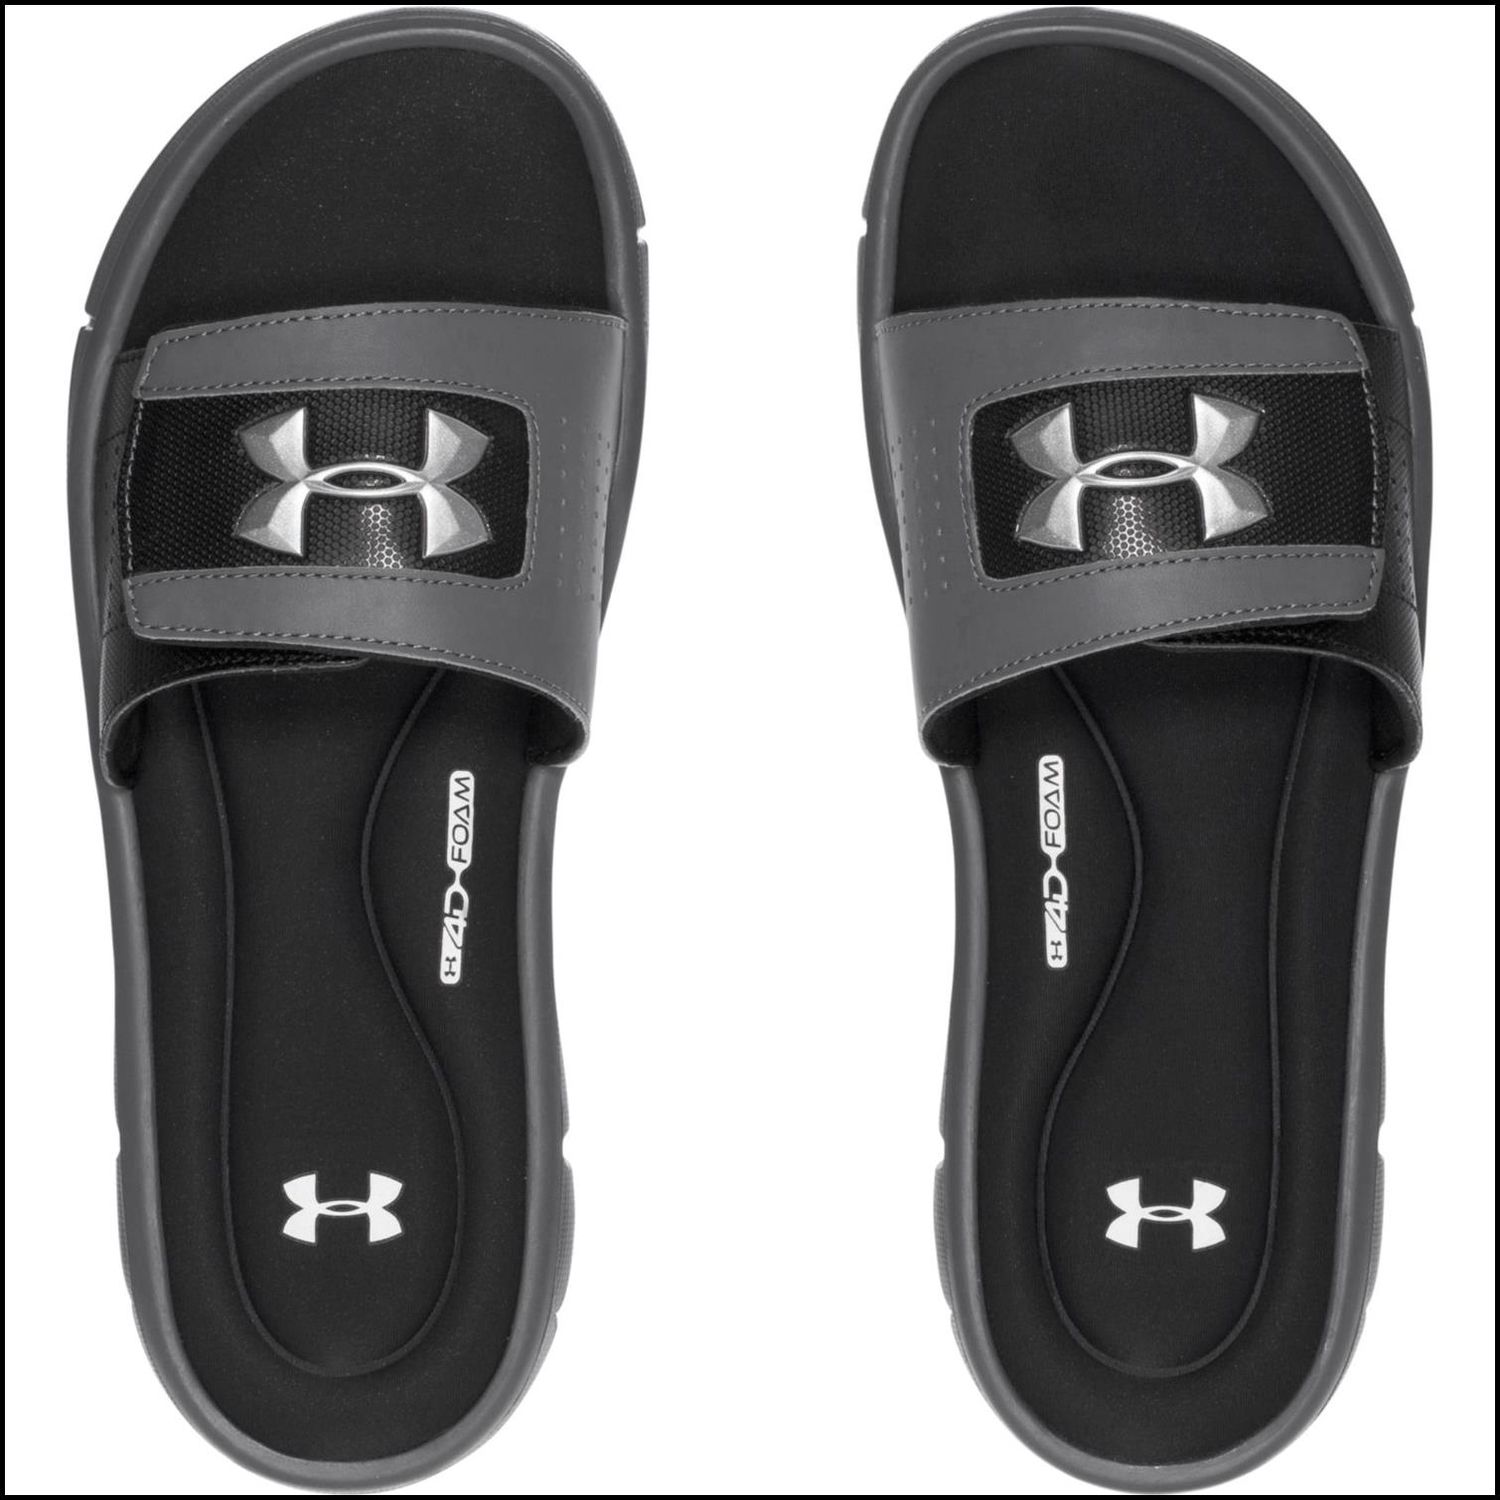 Under Armour Sandals: Footwear for Your 